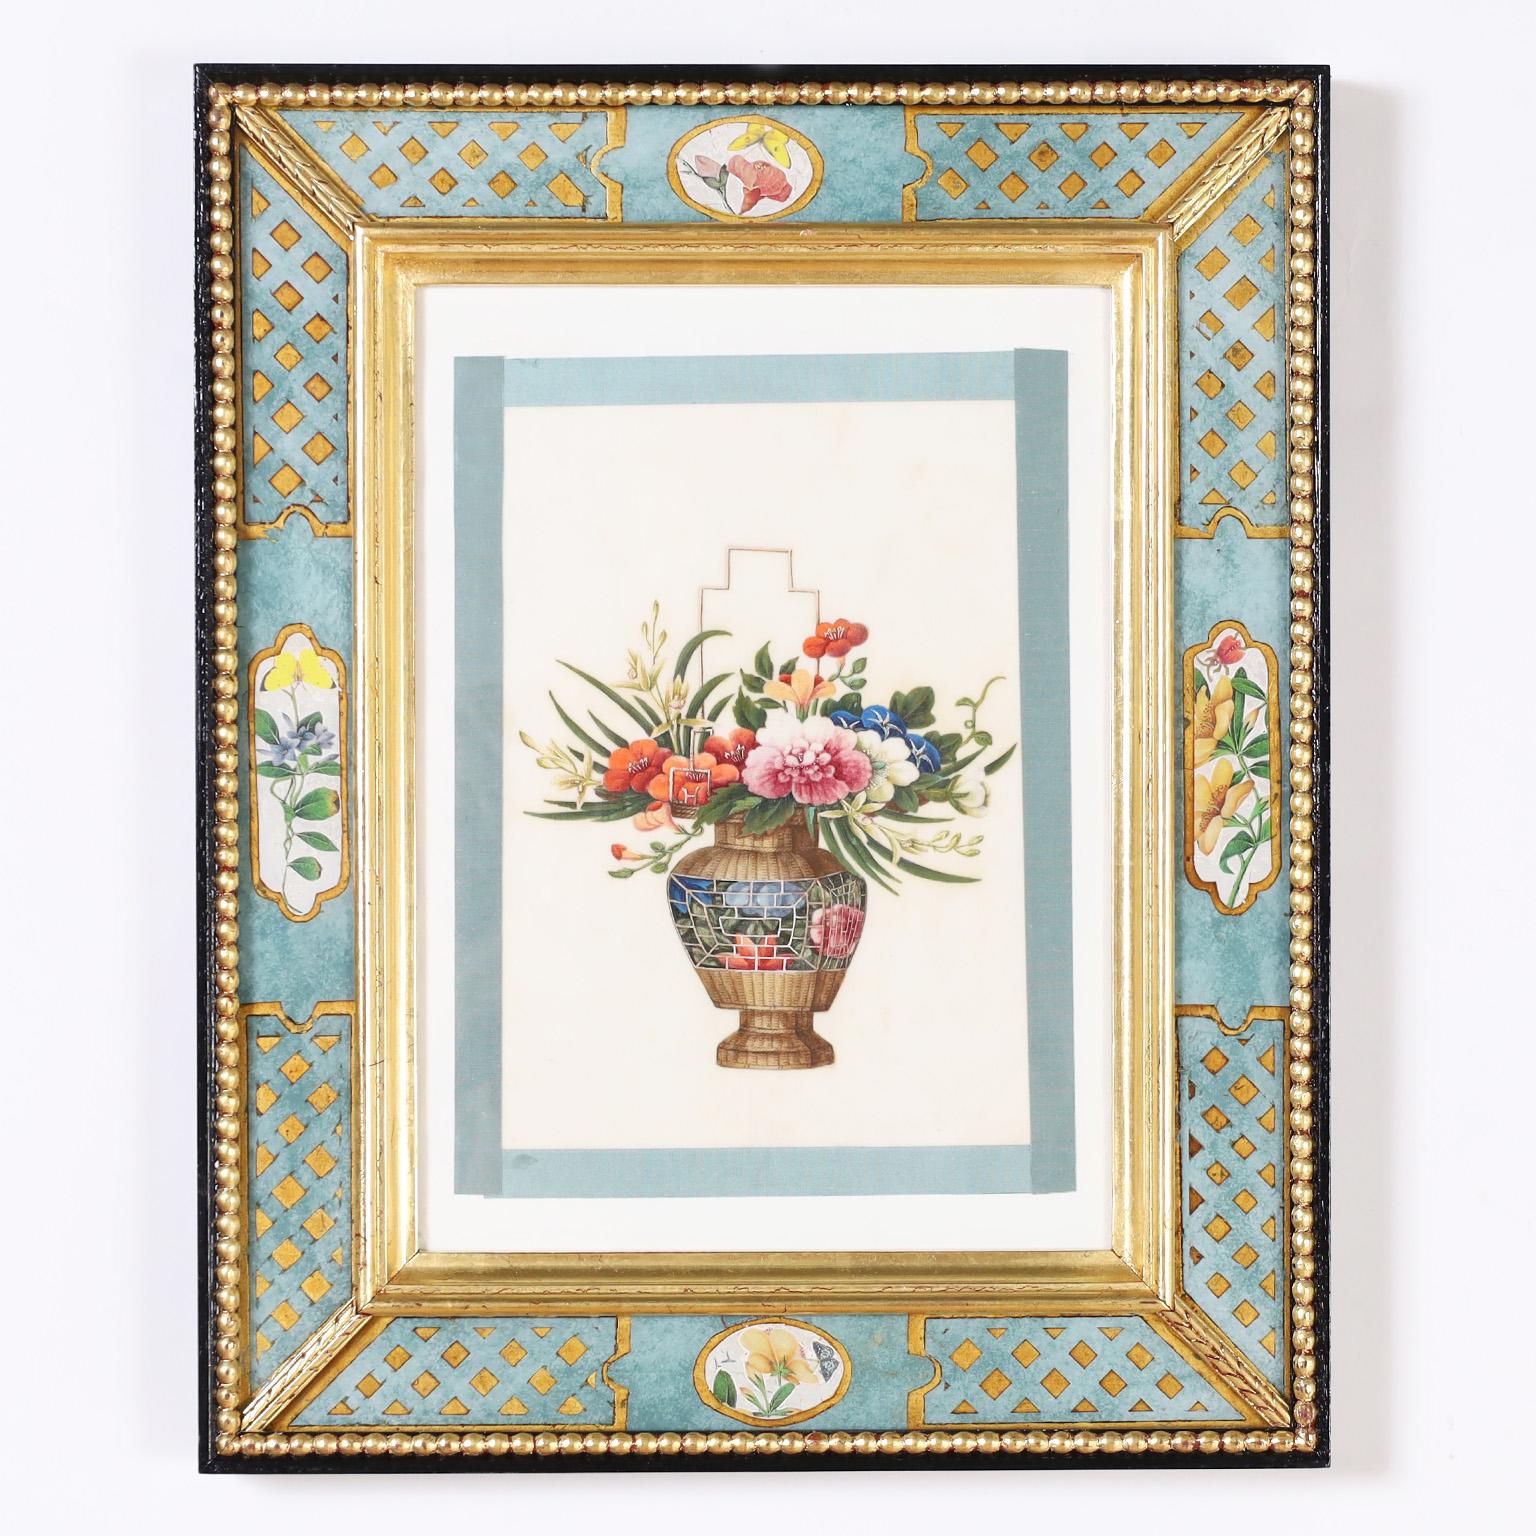 A rare and remarkable set of four 19th century Chinese pith paintings executed in gouache in a traditional delicate style depicting floral arrangements. Presented in later wood frames with reverse decorated glass and gilt beading.